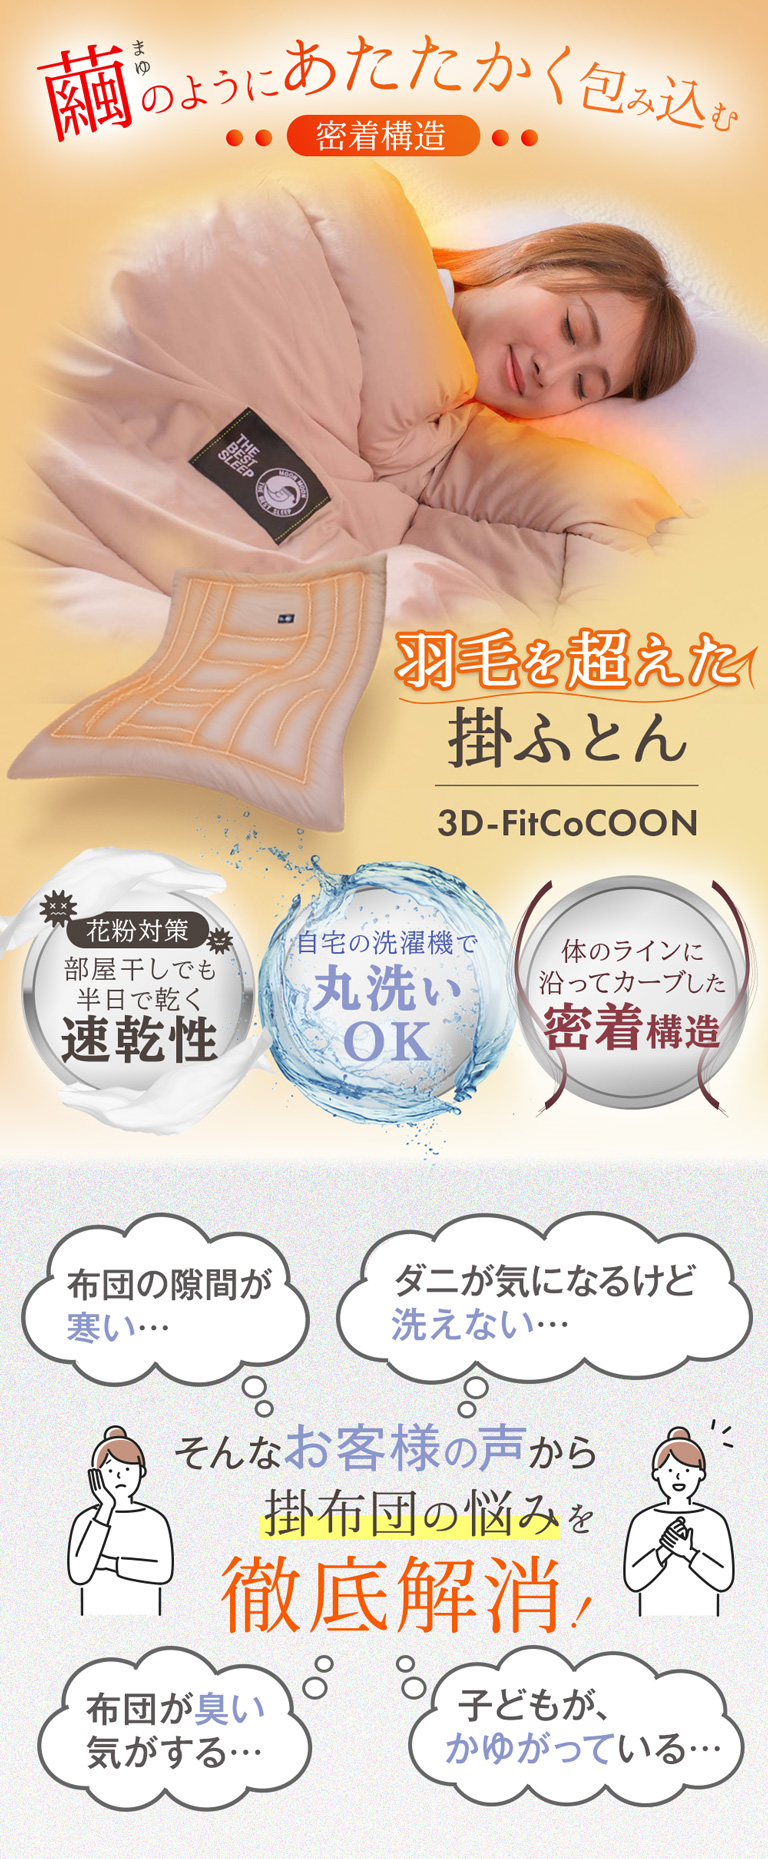 3Dフィット掛け布団 3D-Fit CoCOON